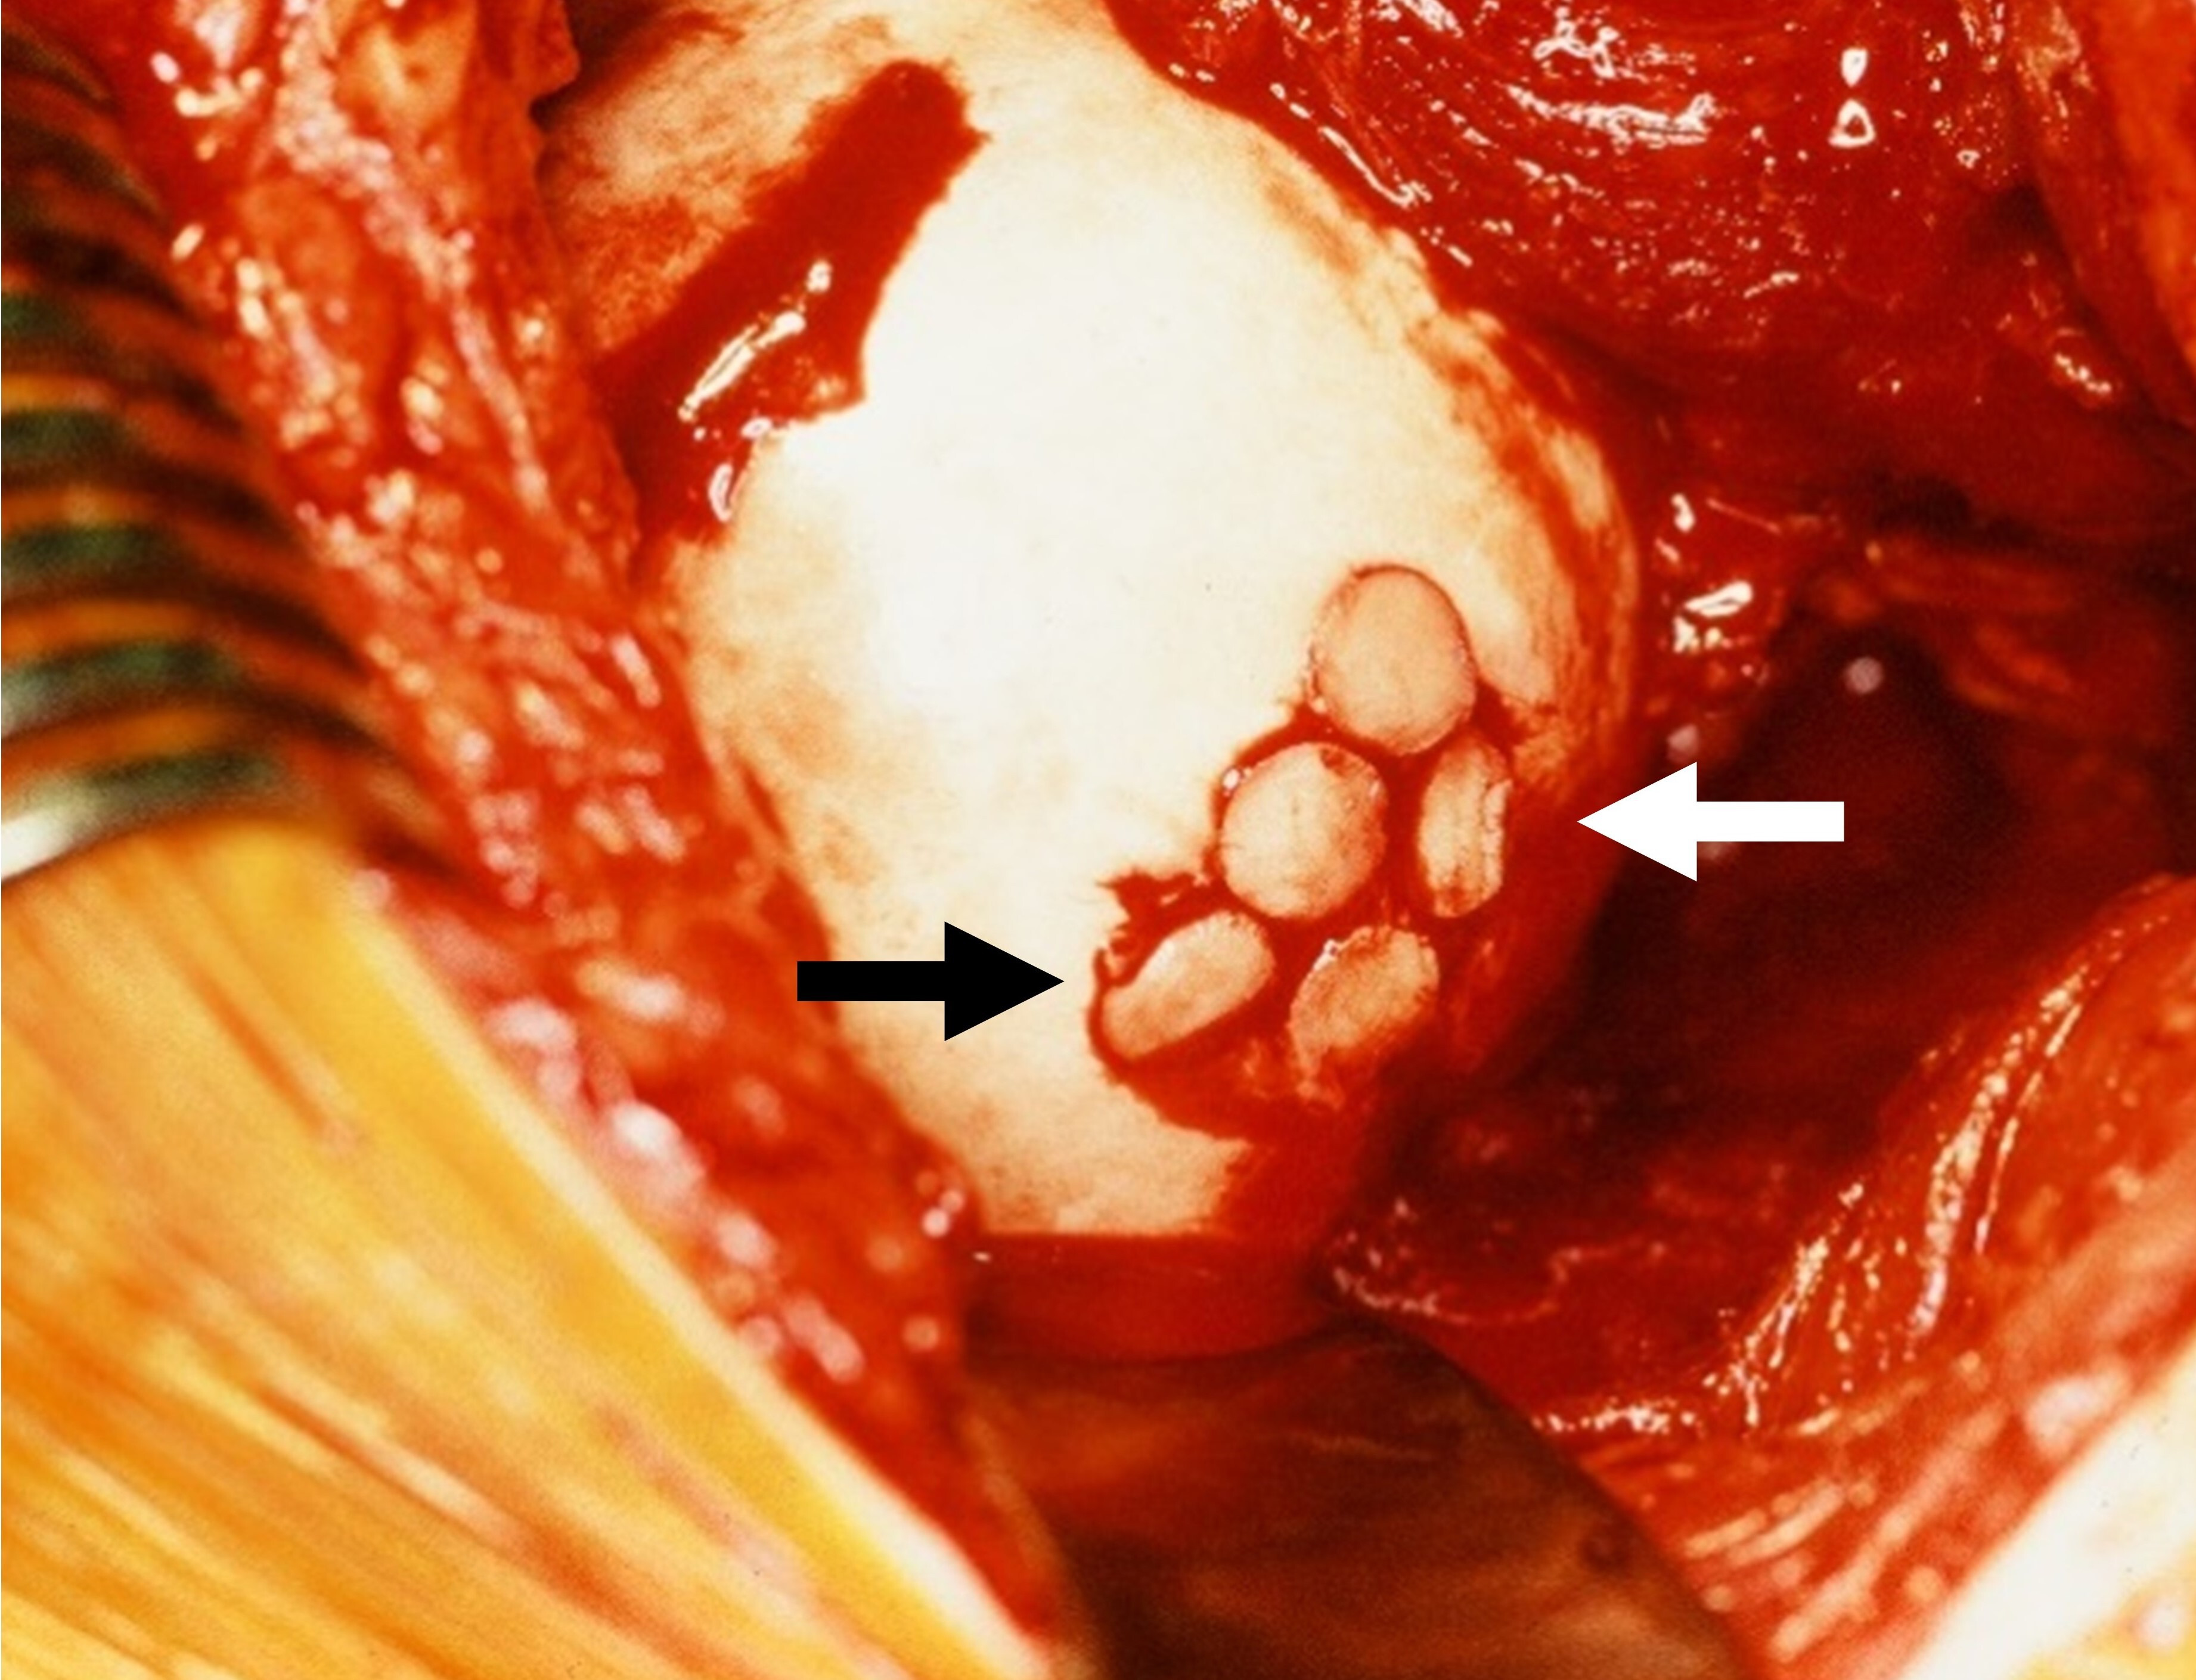 Fig. 5 
          A 29-year-old male patient with stage IIA avascular necrosis of the femoral head treated with osteochondral auto- or allograft transfer (OAT). The grafts were taken from the ipsilateral knee joint. In knee-to-hip transfer, perfect reconstruction is difficult to obtain from a technical perspective. The intraoperative view shows an incongruous femoral head surface due to incorrect placement of two grafts (arrows). At 23.8 years’ follow-up, this patient had not undergone conversion to THA.
        